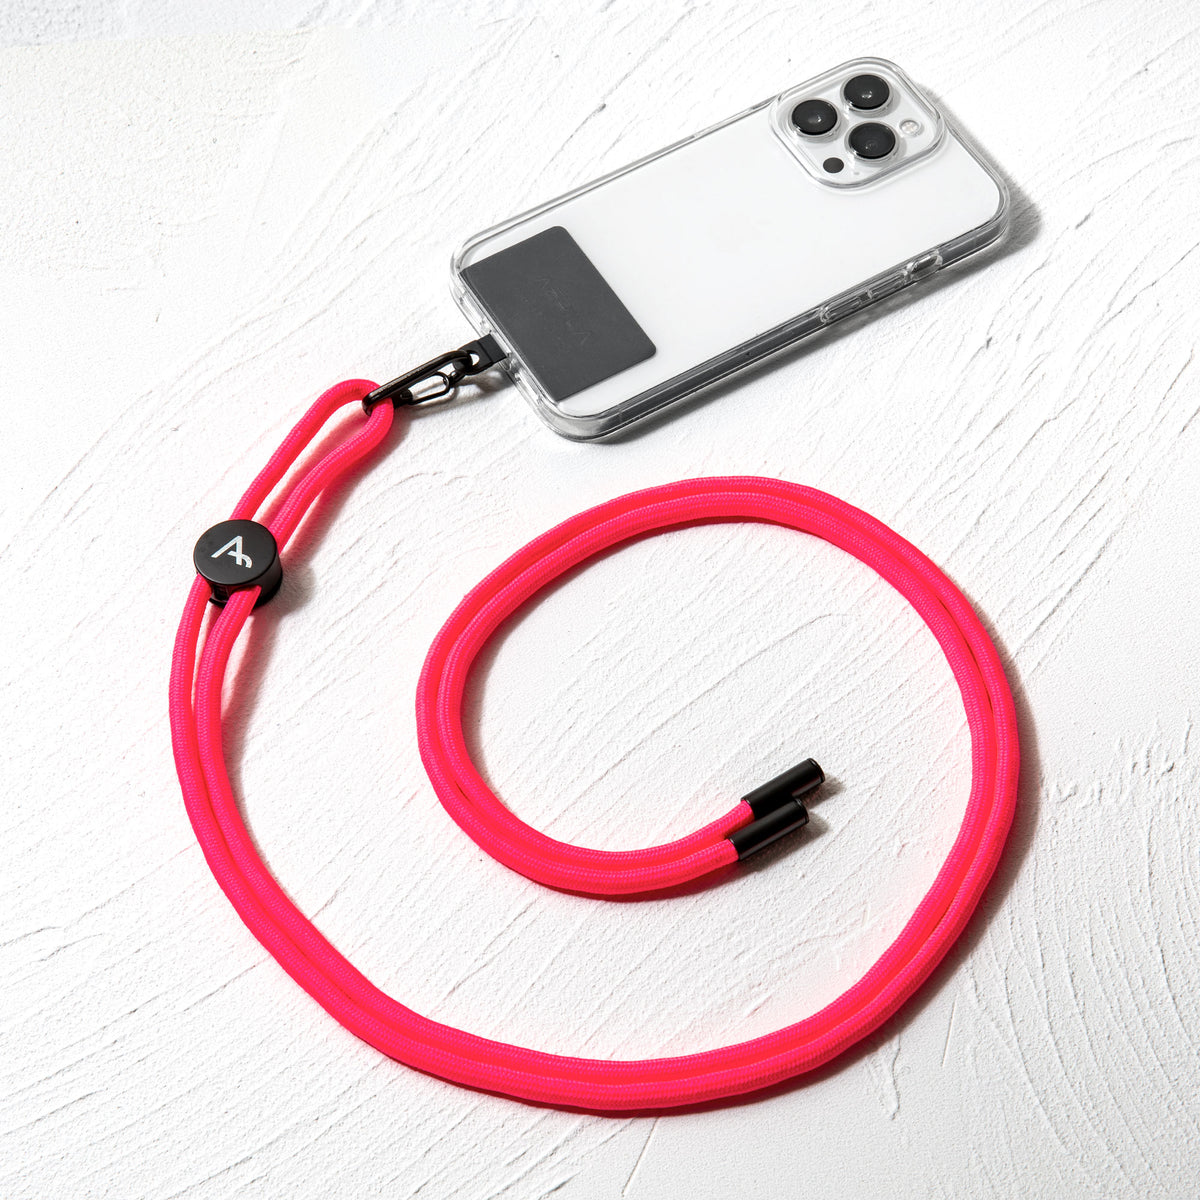 NORE Phone Lanyard set with Connector Patch Card | NEON Collection - AERILA